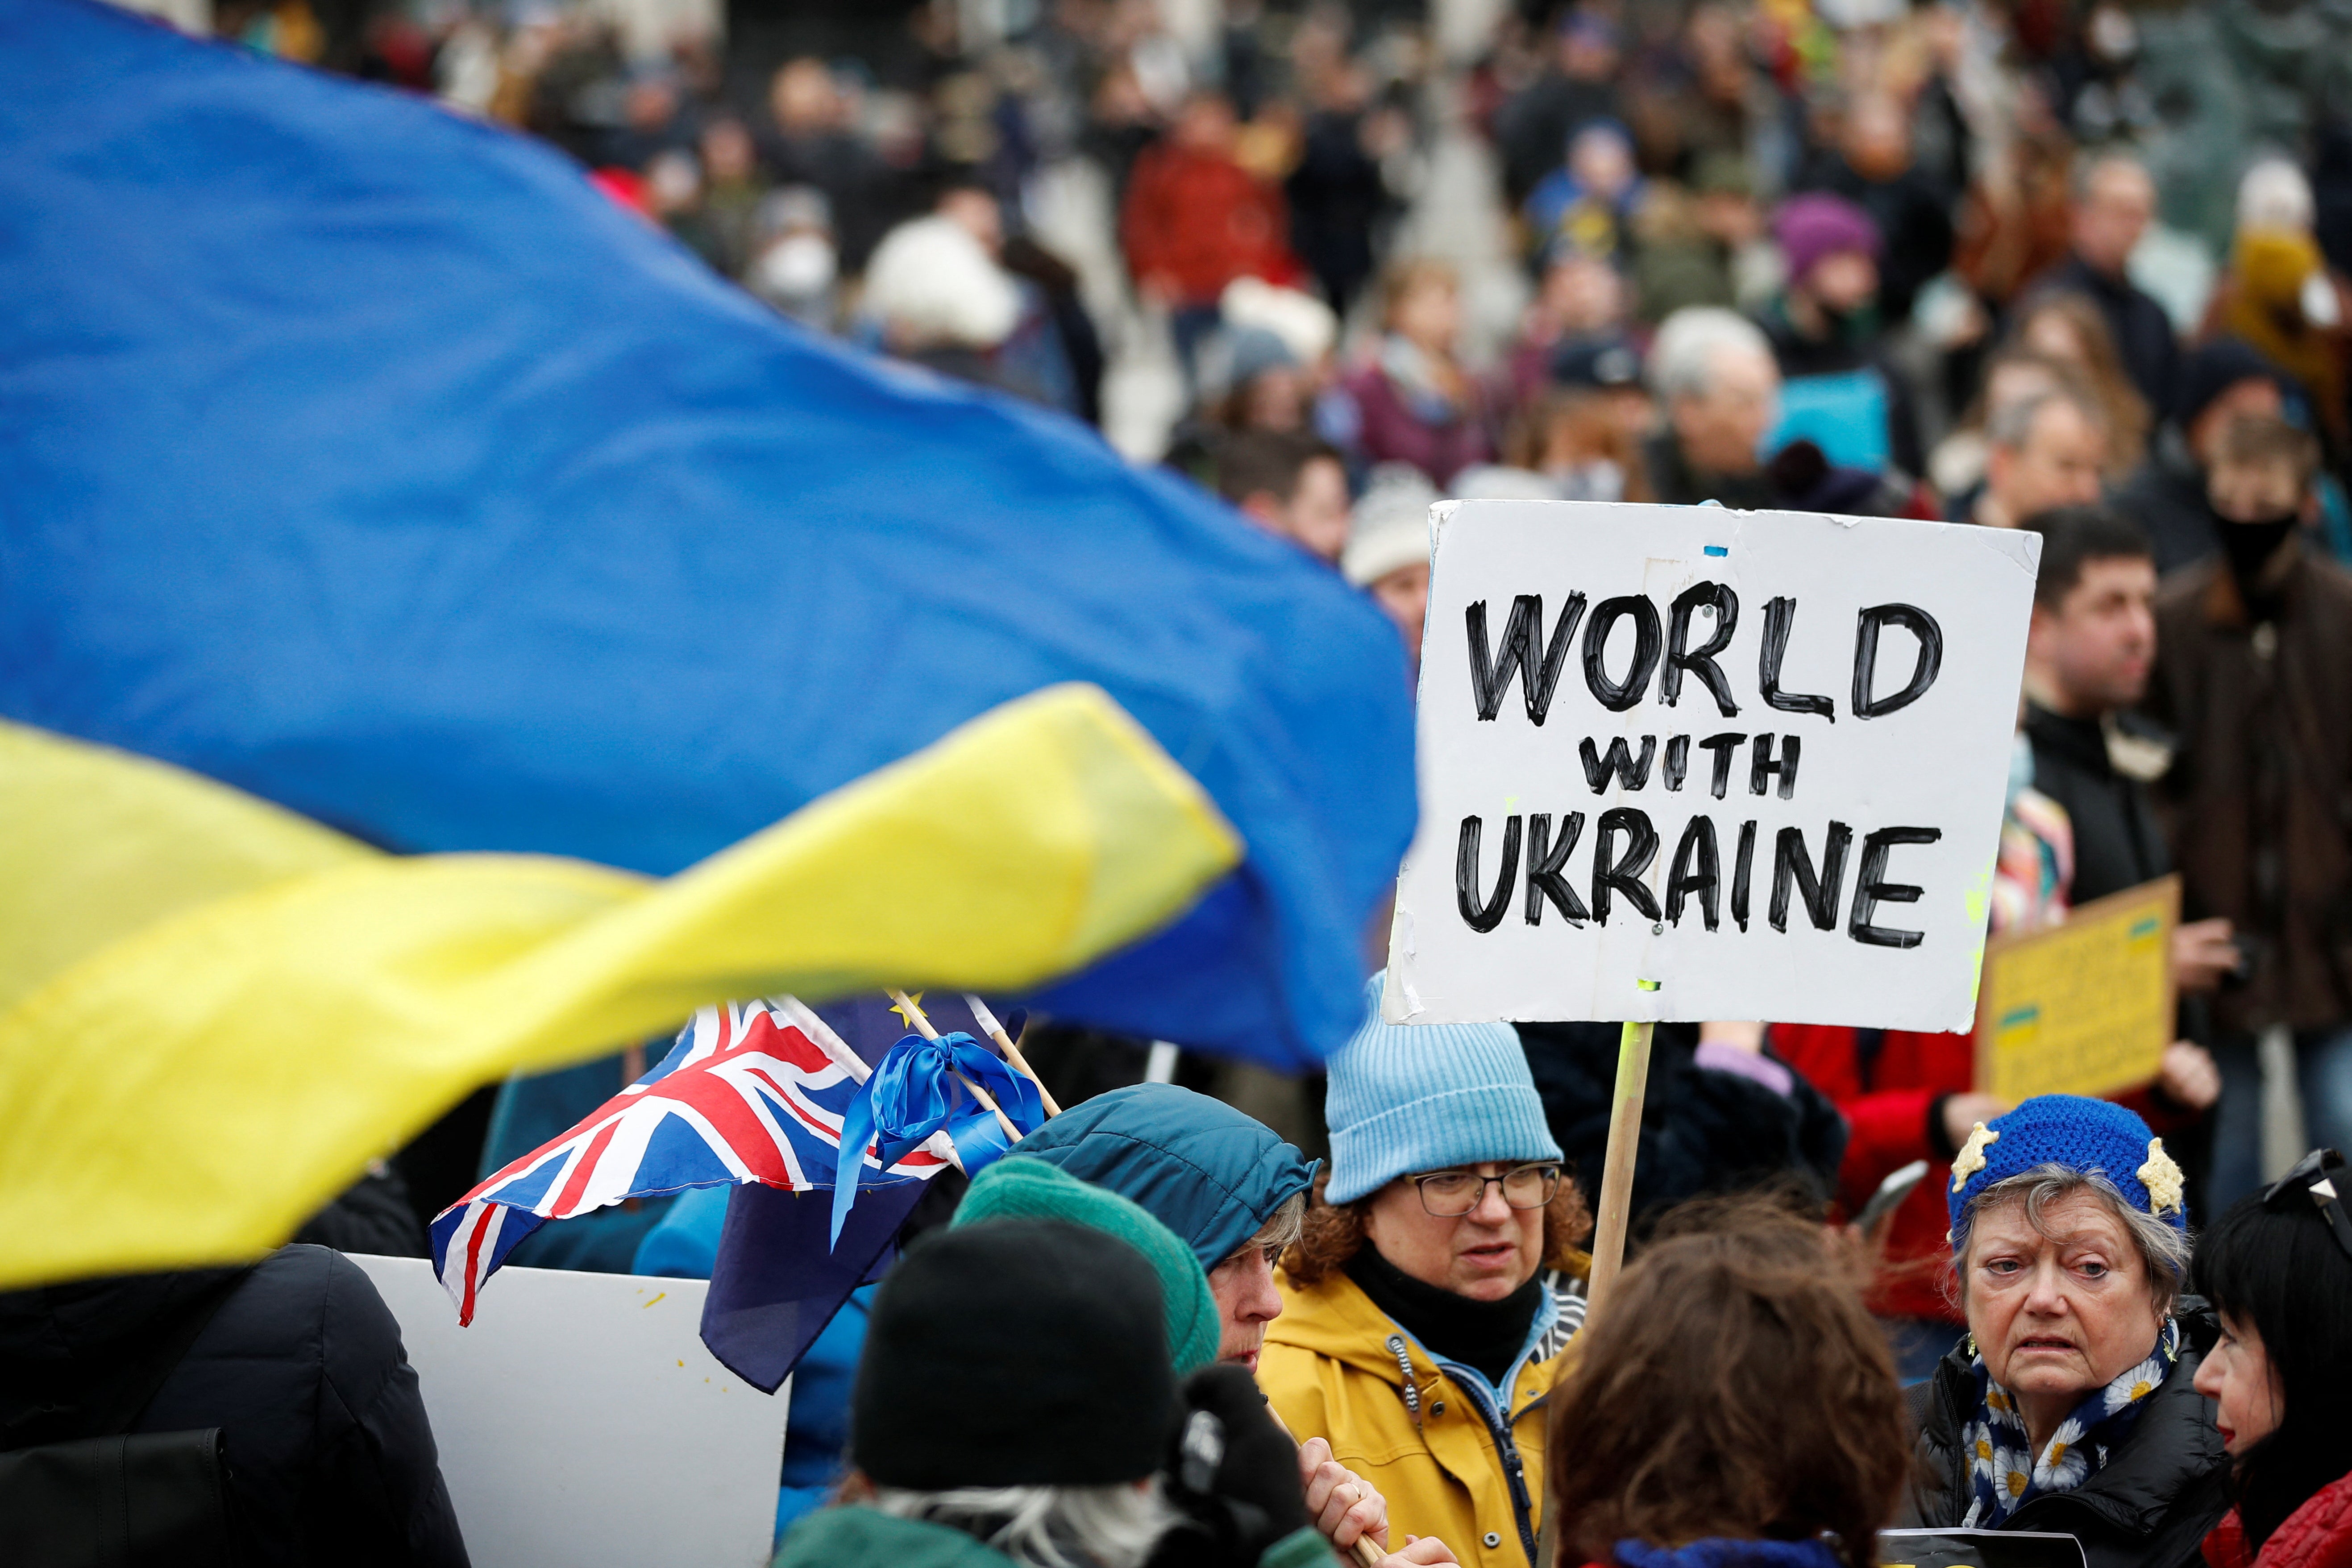 Demonstrators take part in a protest against Russia's invasion of Ukraine, at Trafalgar Square, in London